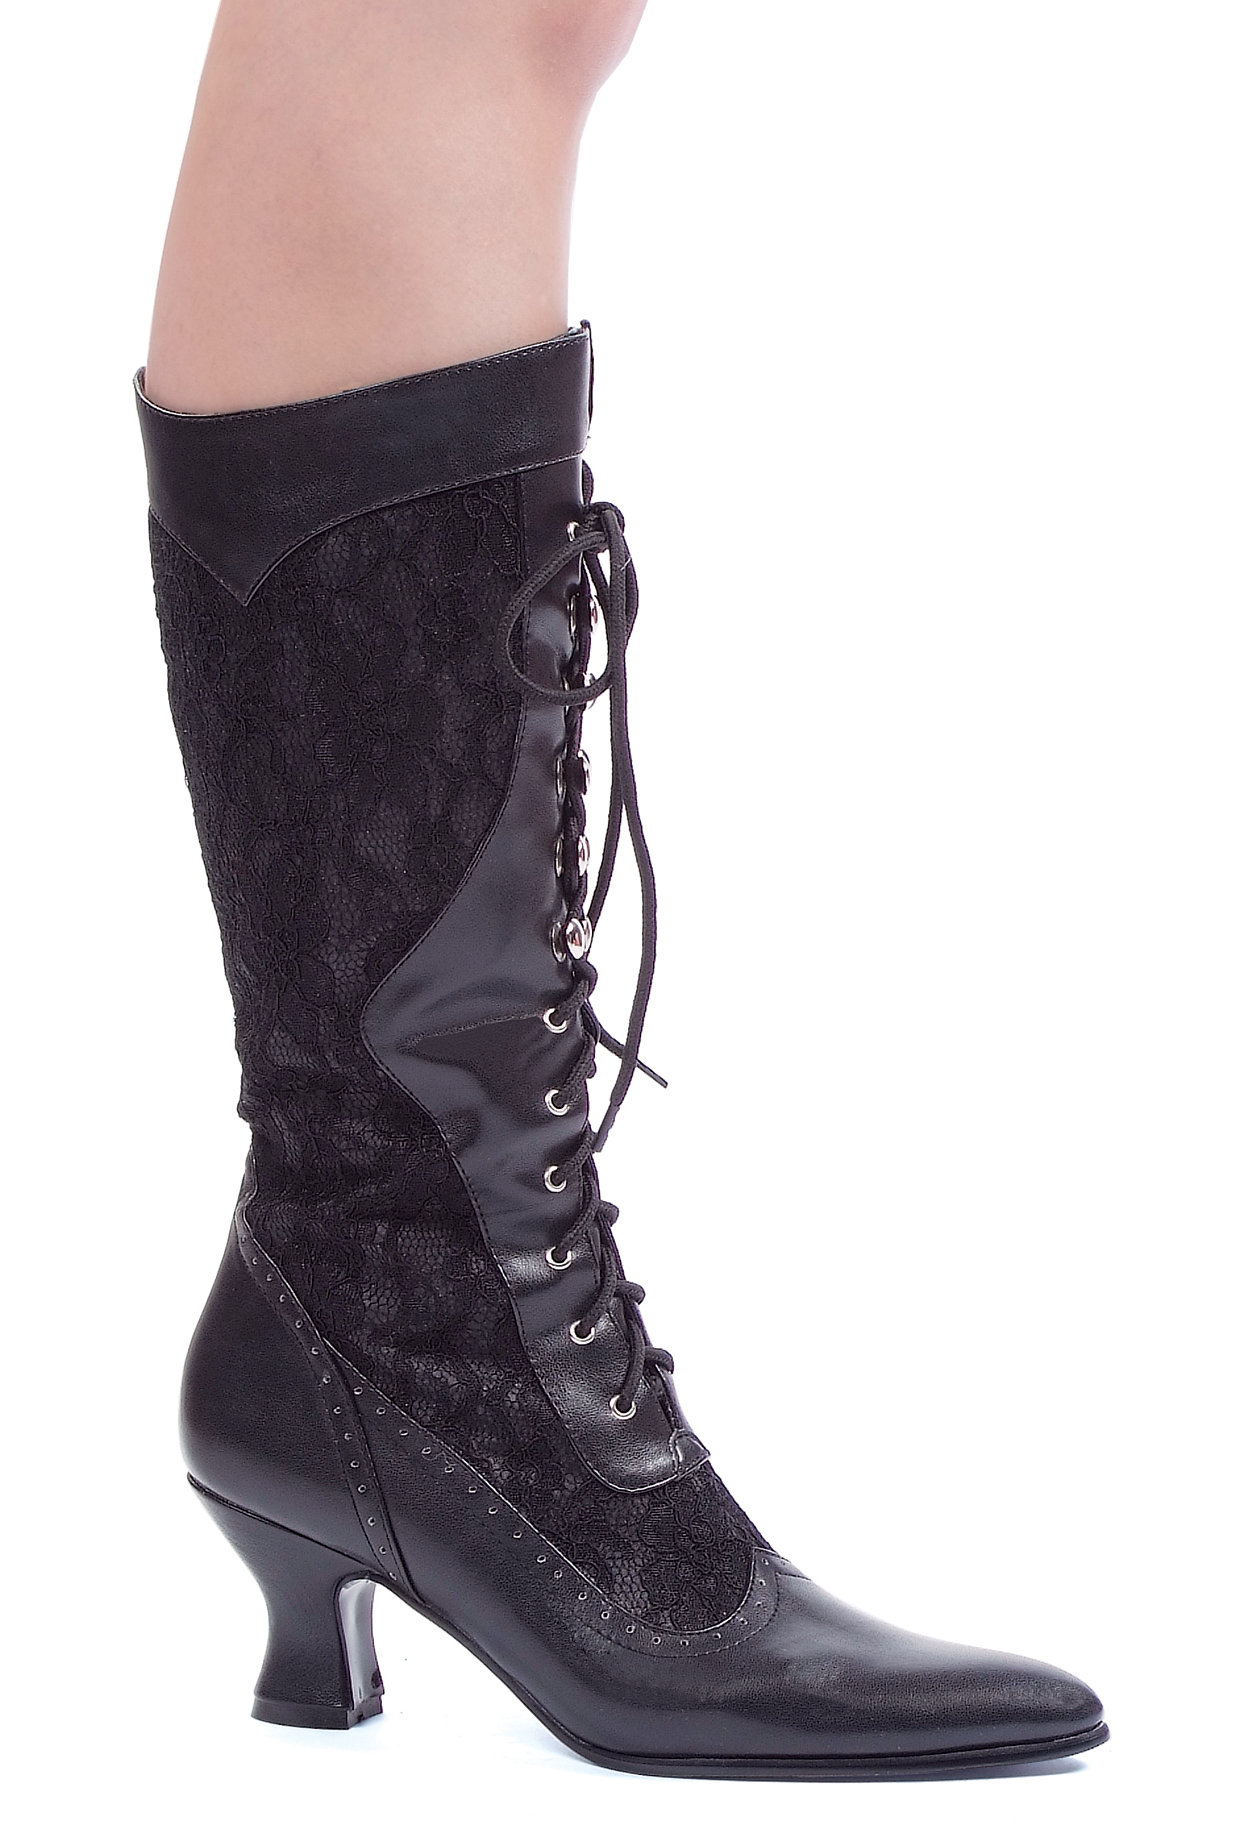 Rebecca - 2.5- Heel Boots with Lace